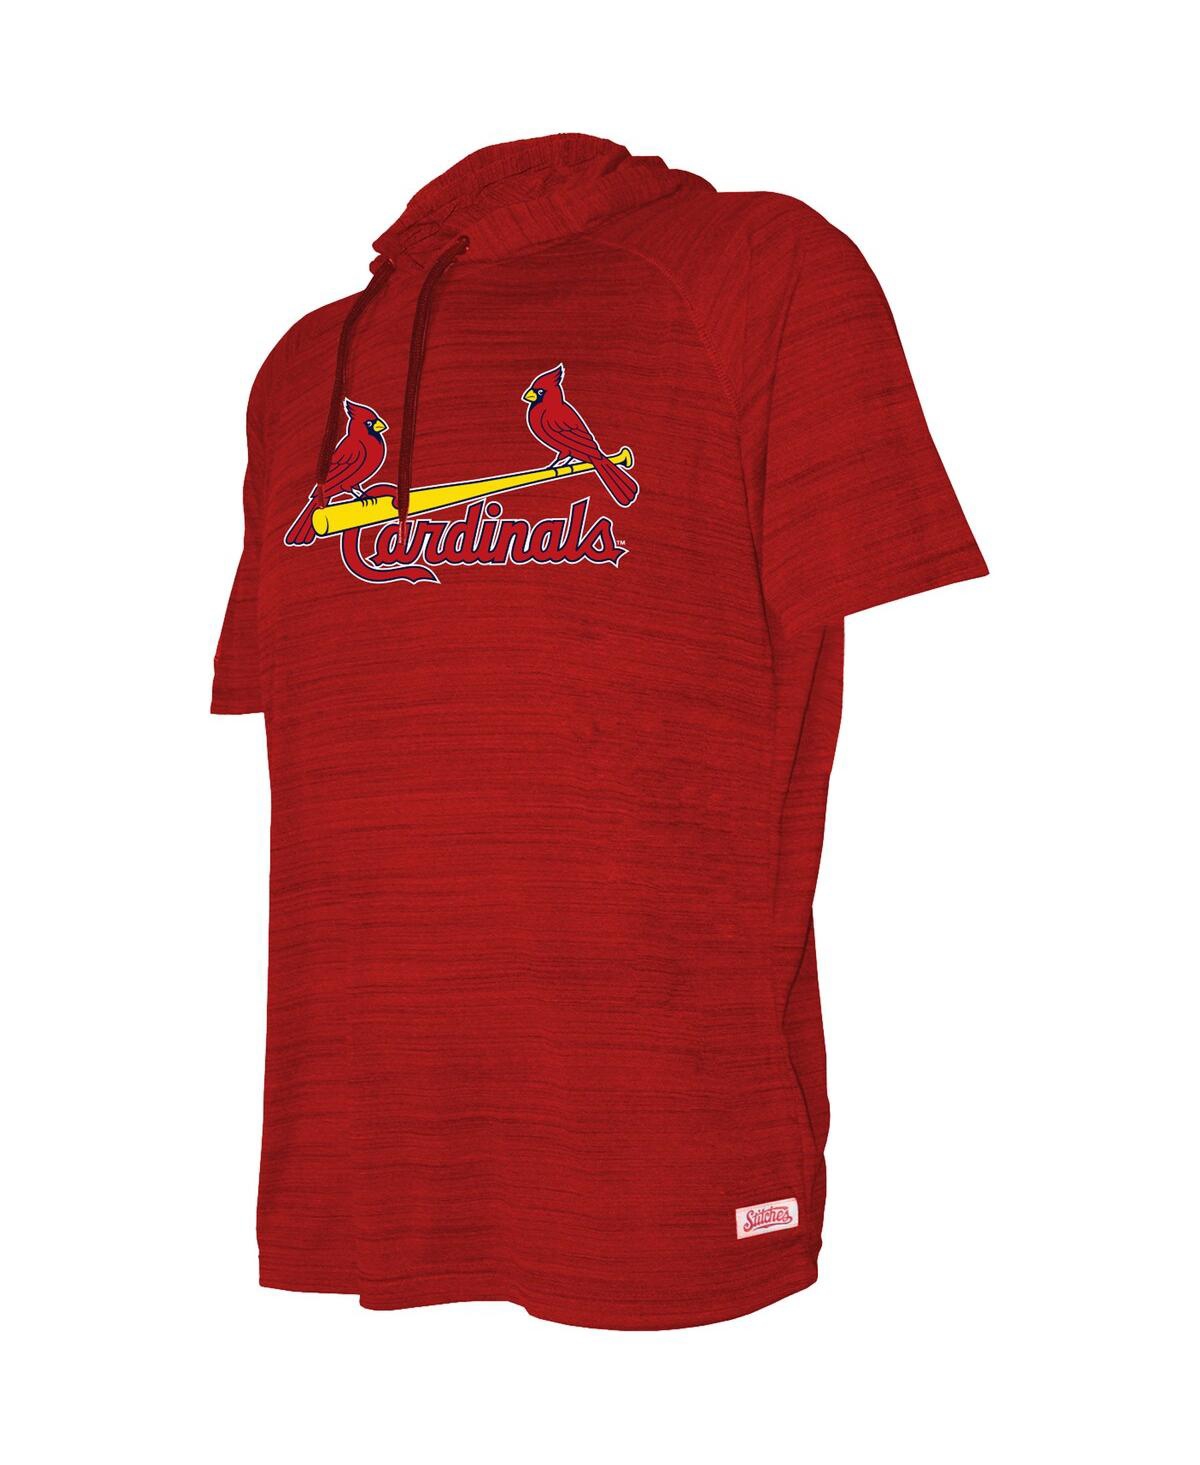 Shop Stitches Big Boys And Girls  Heather Red St. Louis Cardinals Raglan Short Sleeve Pullover Hoodie